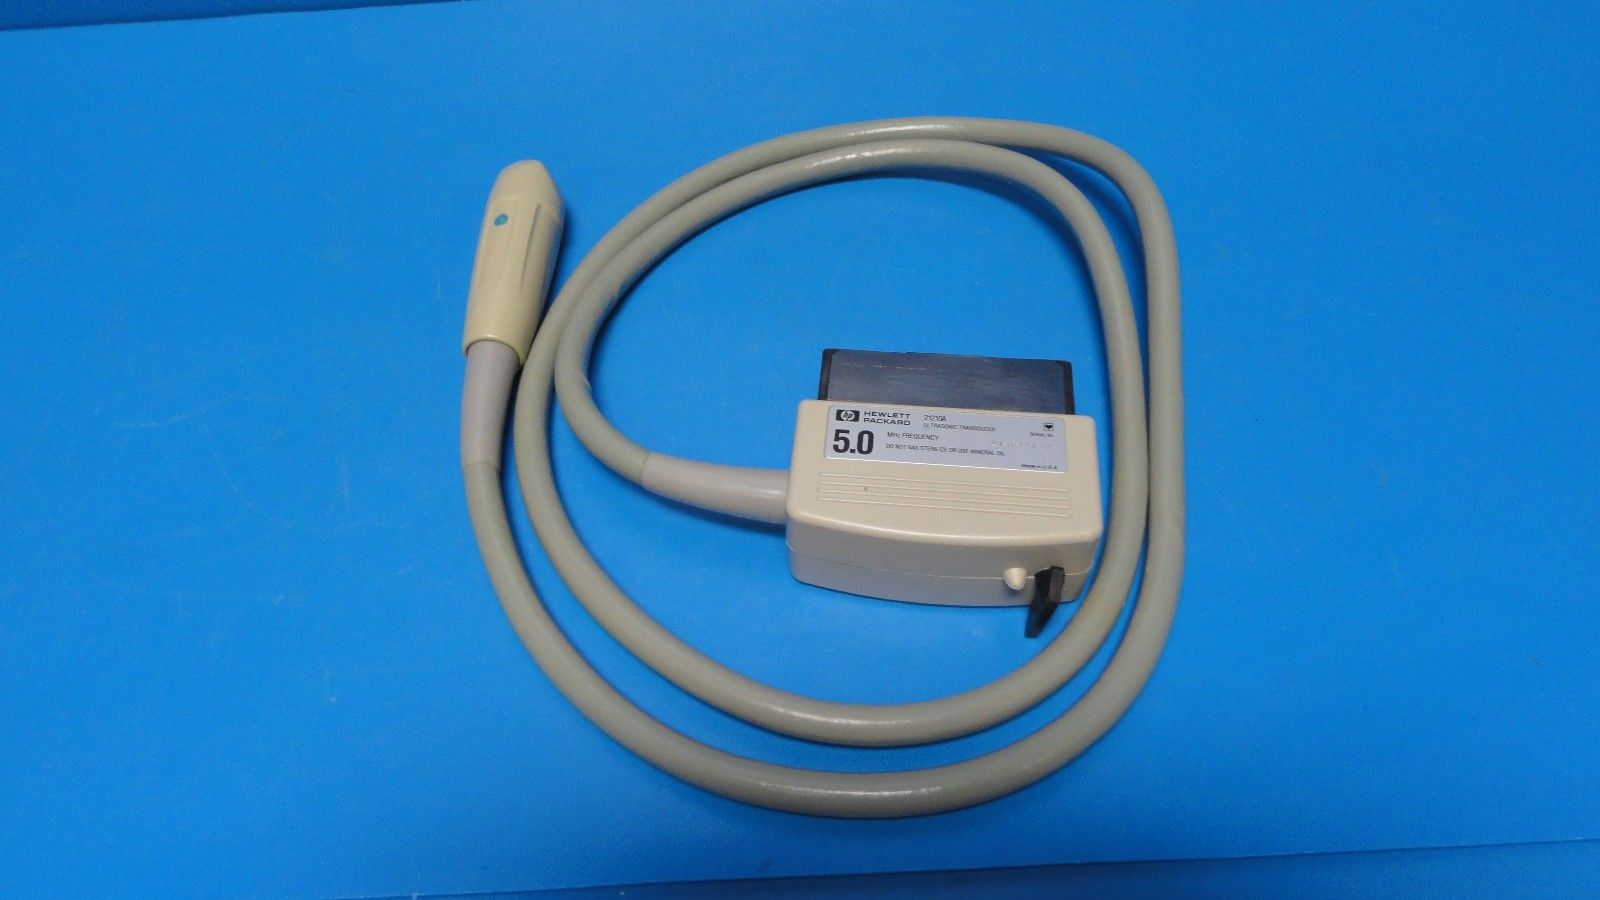 HP 21210A  5.0MH Phased Array Probe for Sonos 1000/1500/2000 (7037) DIAGNOSTIC ULTRASOUND MACHINES FOR SALE